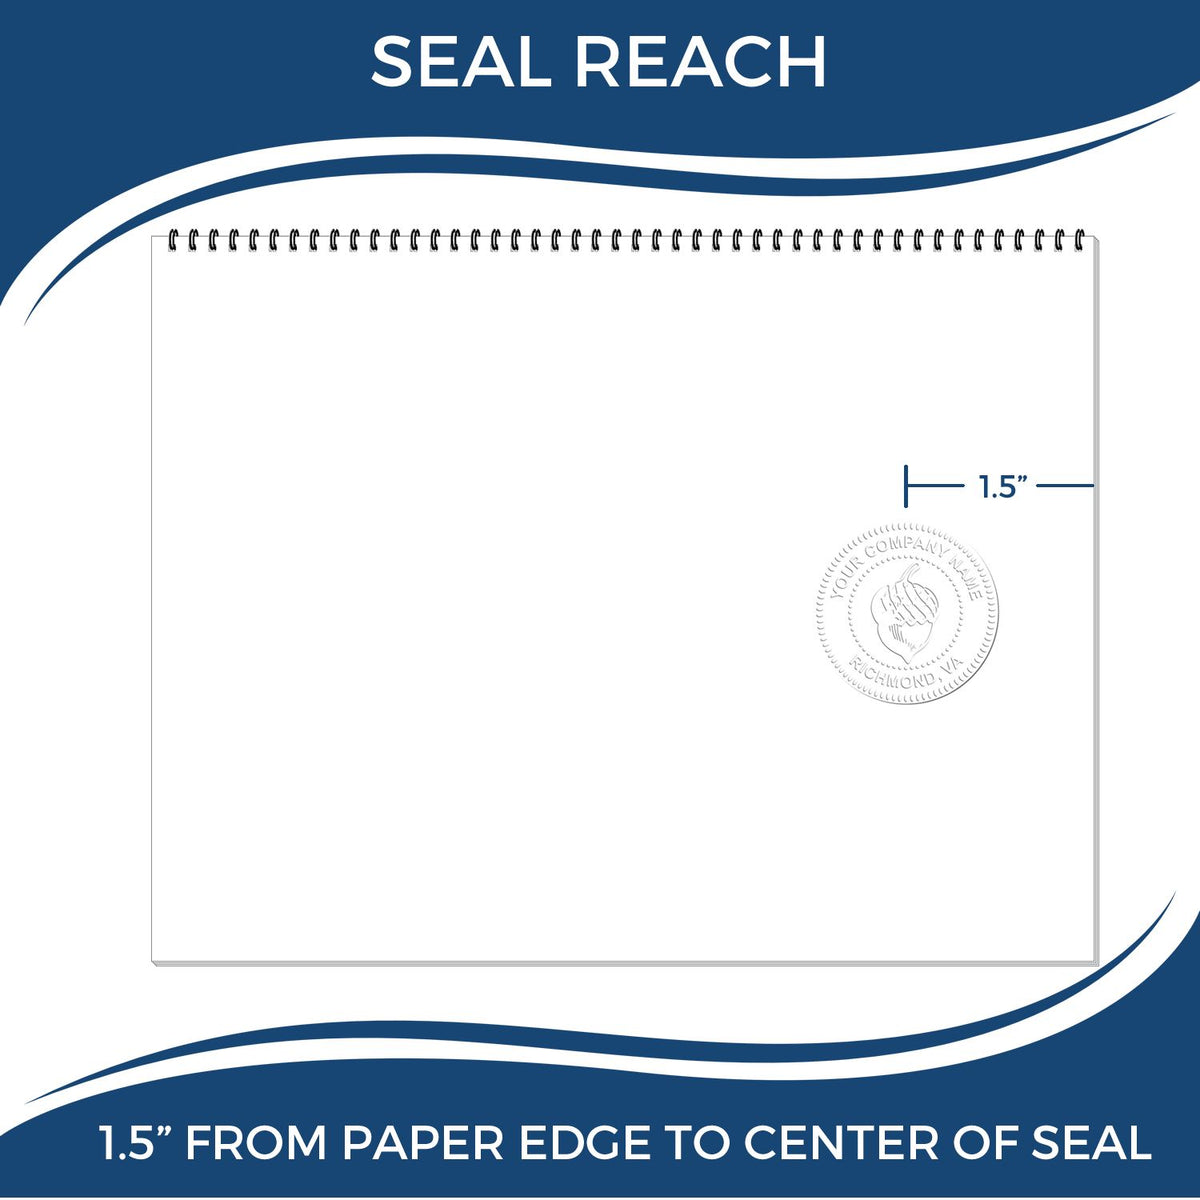 An infographic showing the seal reach which is represented by a ruler and a miniature seal image of the Gift District of Columbia Engineer Seal